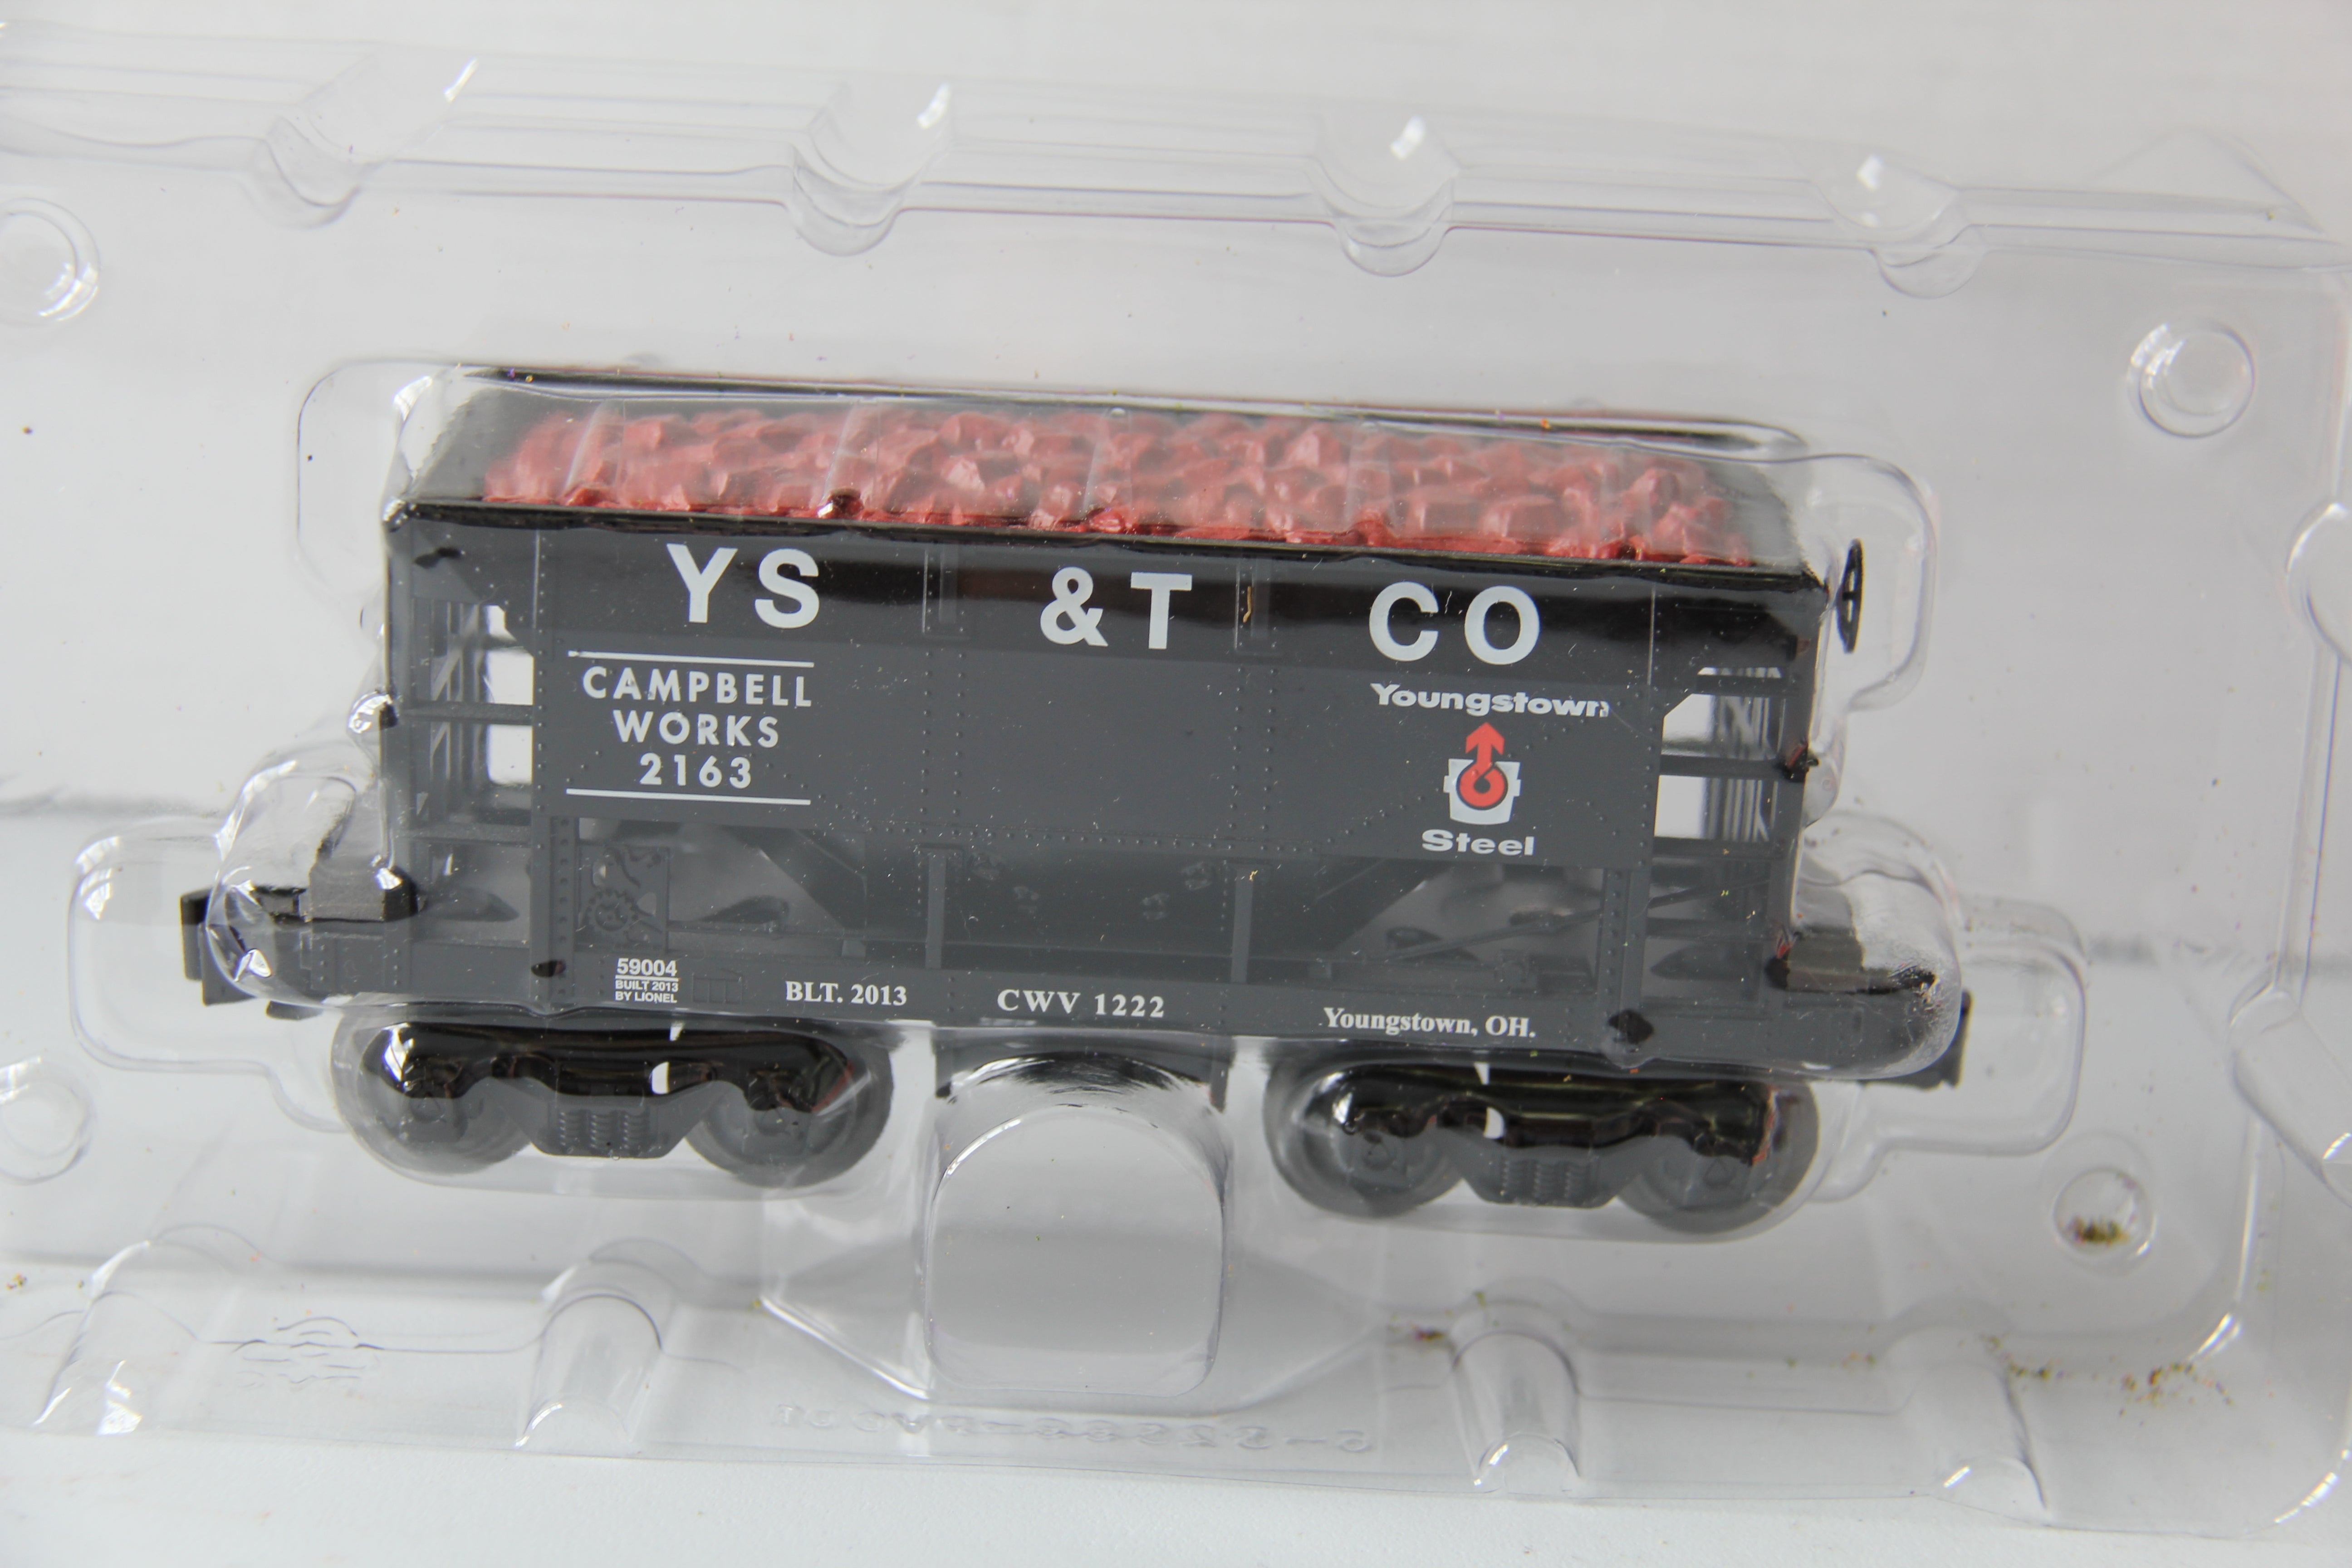 Lionel 6-59004 Catholic War Vets Youngstown Steel Ore Car-Second hand-M2614